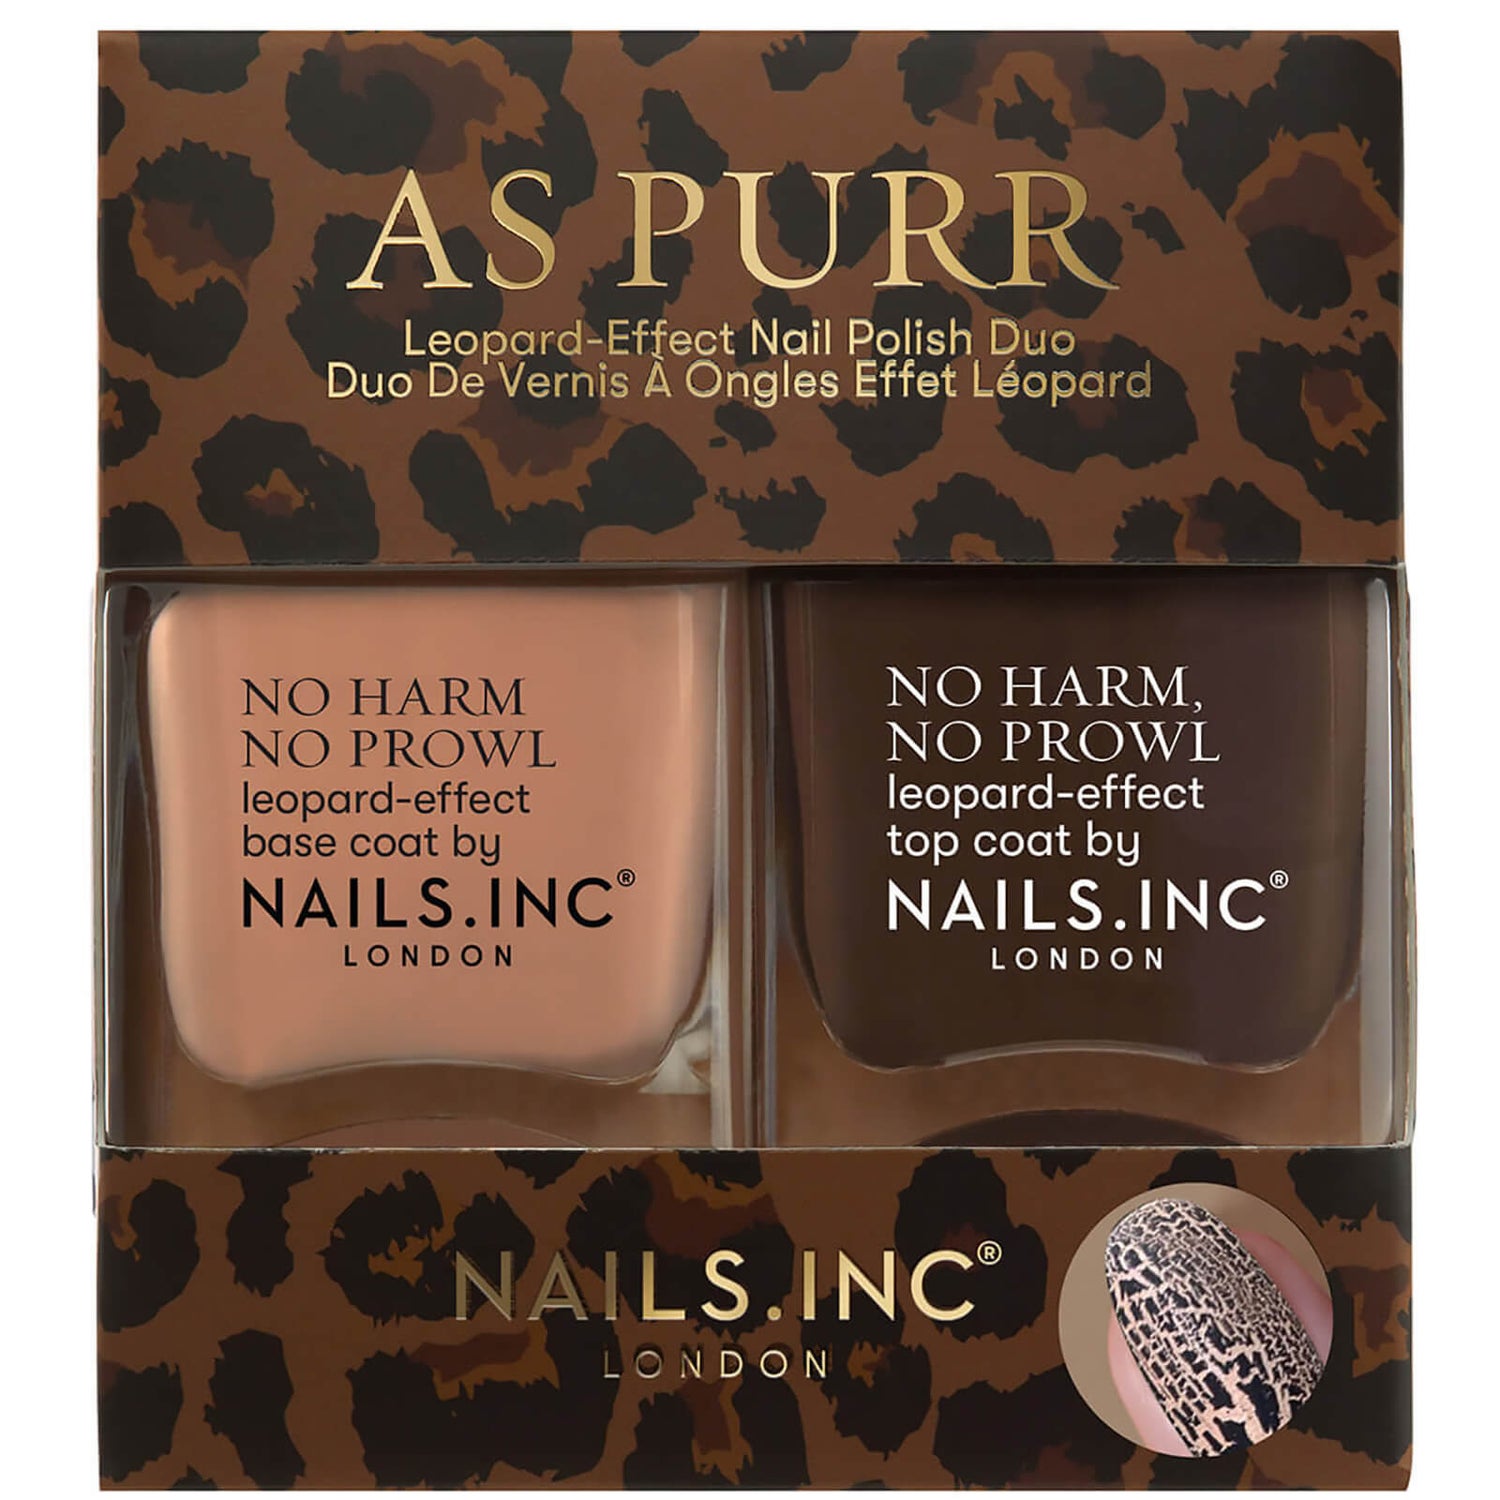 nails inc. As Purr Leopard Duo